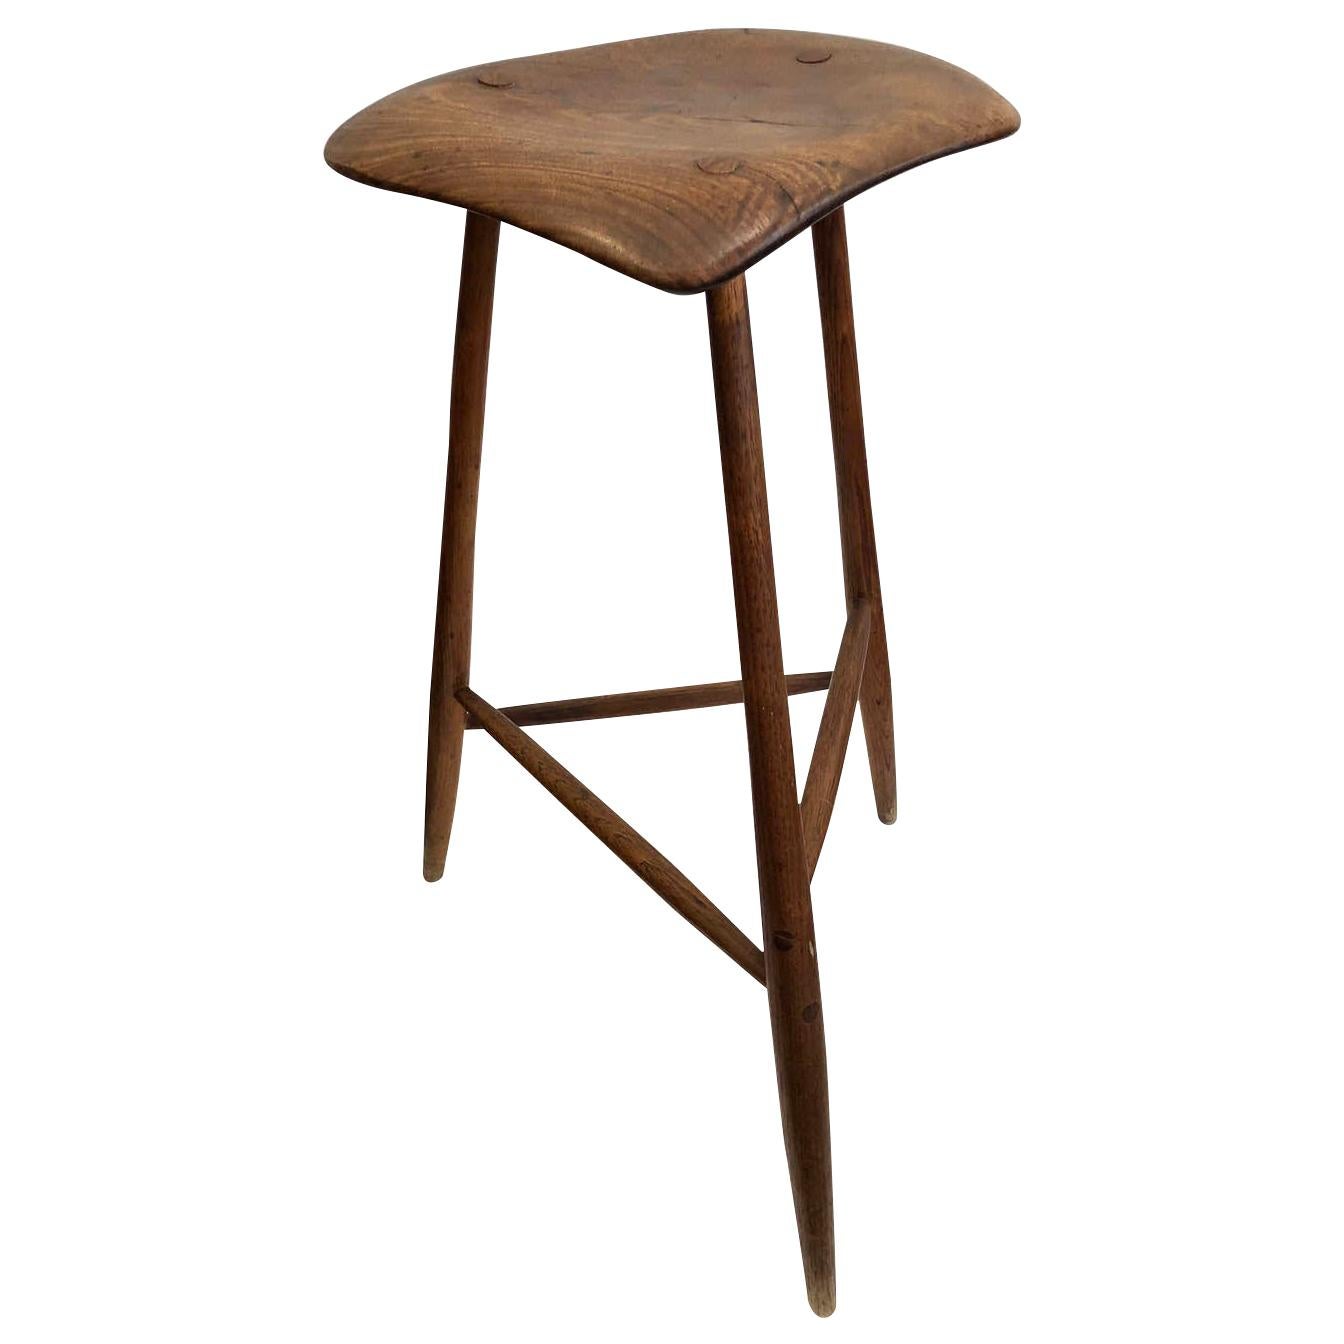 Wharton Esherick Wooden Stool Signed and Dated